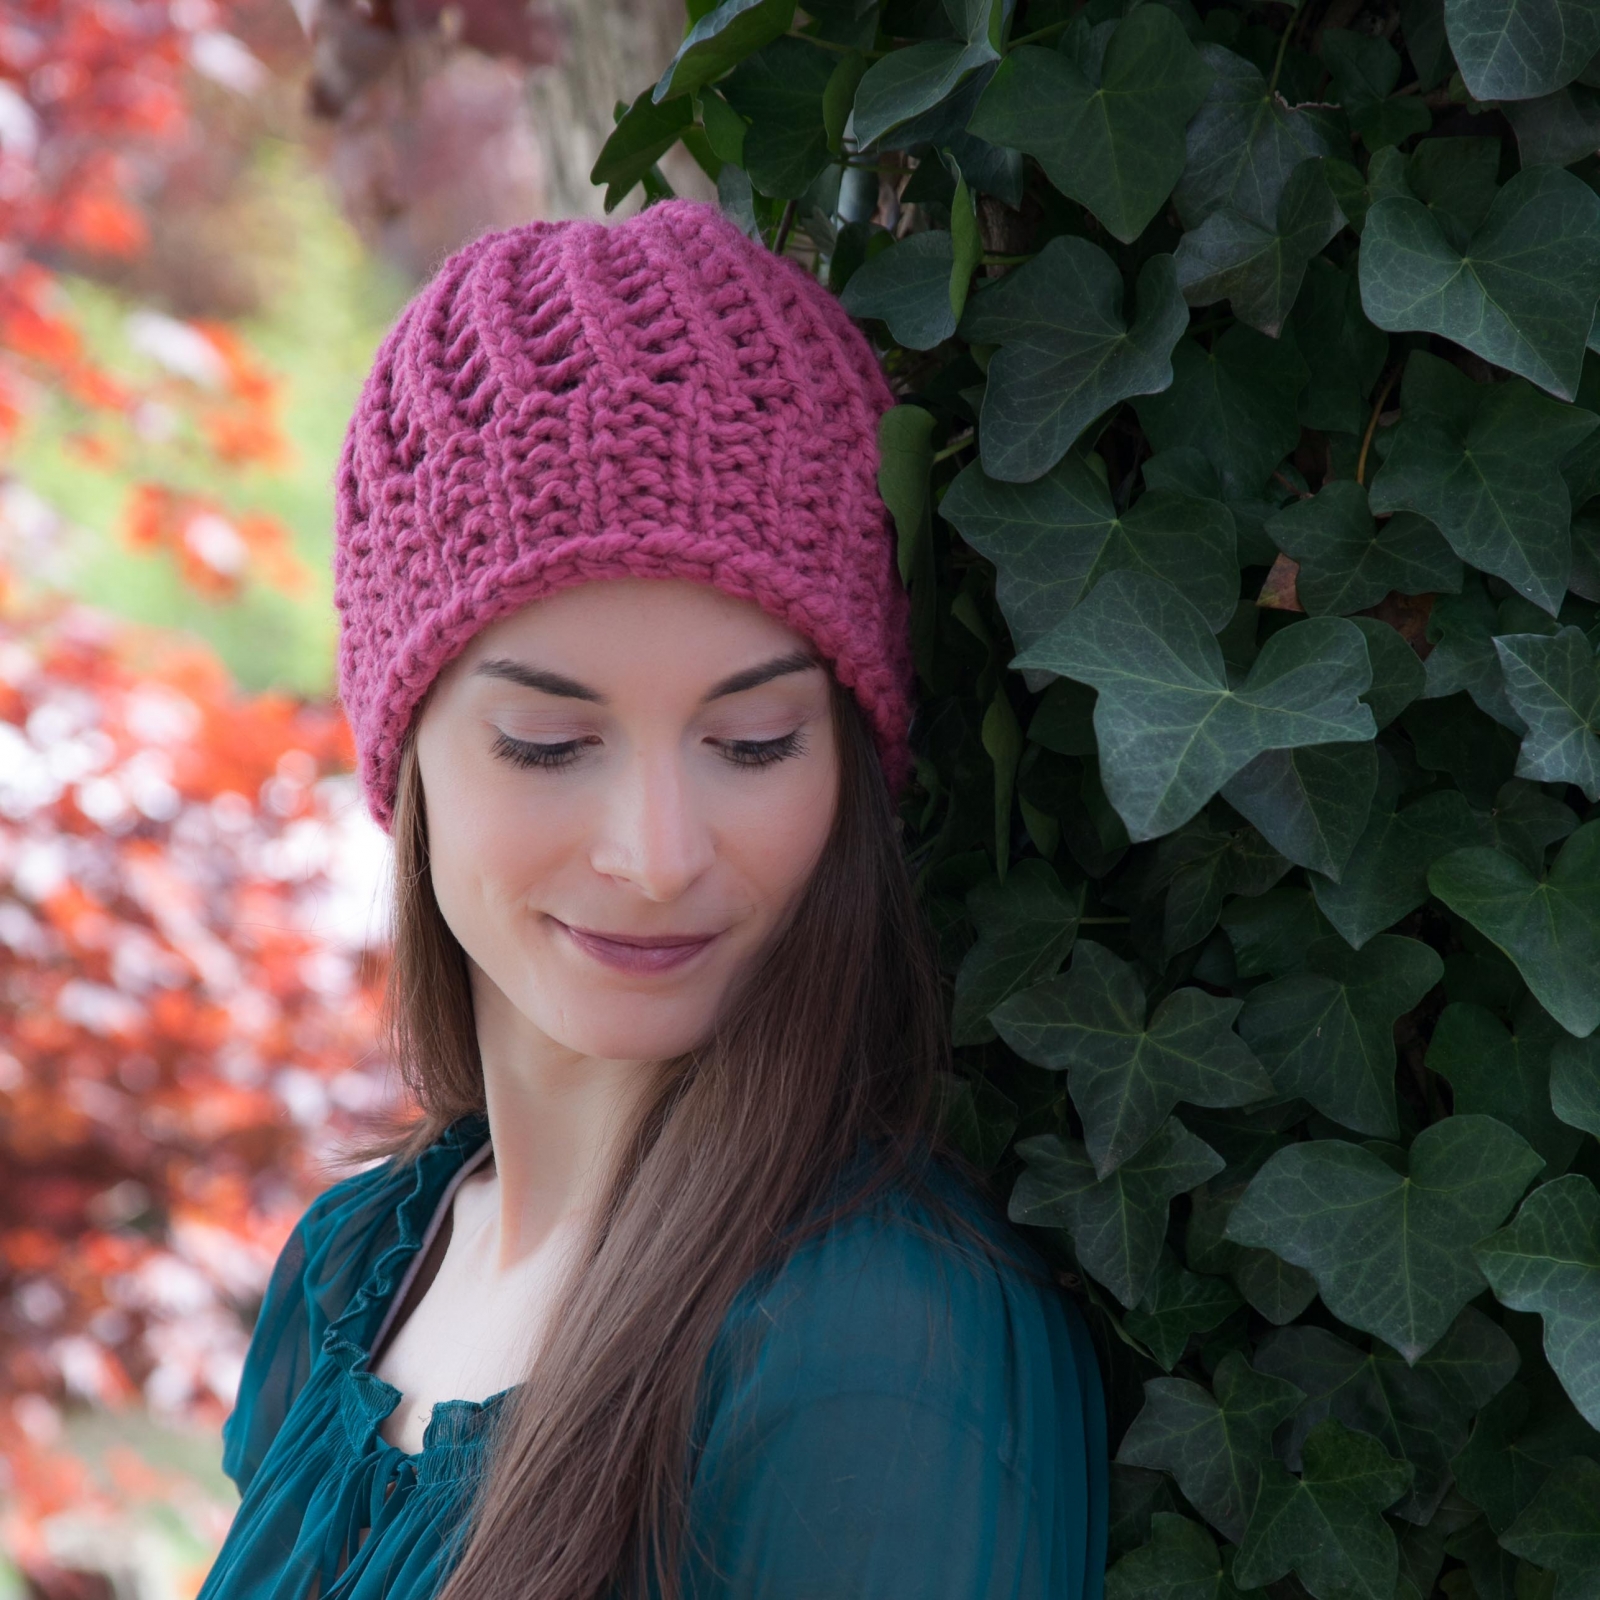 Loom Knit Eyelet Lace Hat Pattern, PDF PATTERN Download | This Moment ...